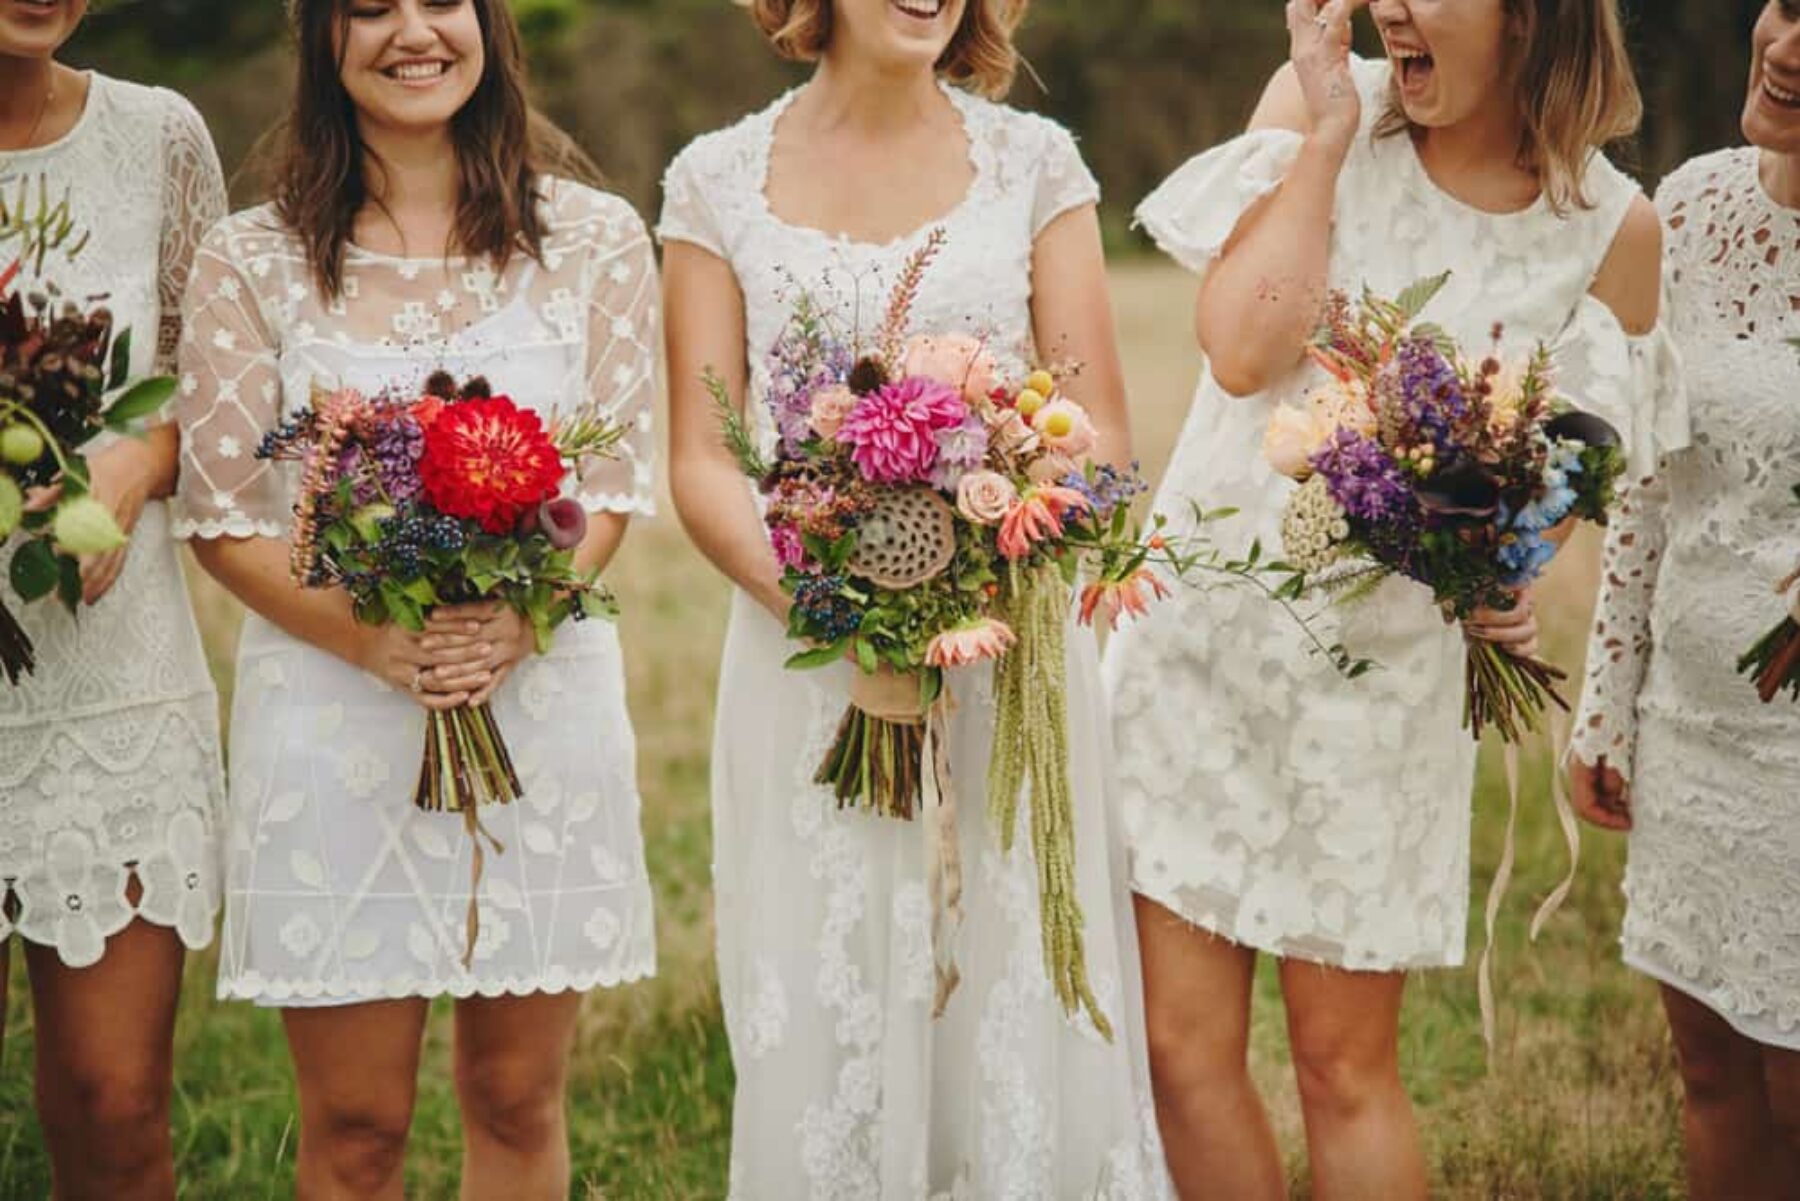 Bridesmaids in white with vibrant bouquets